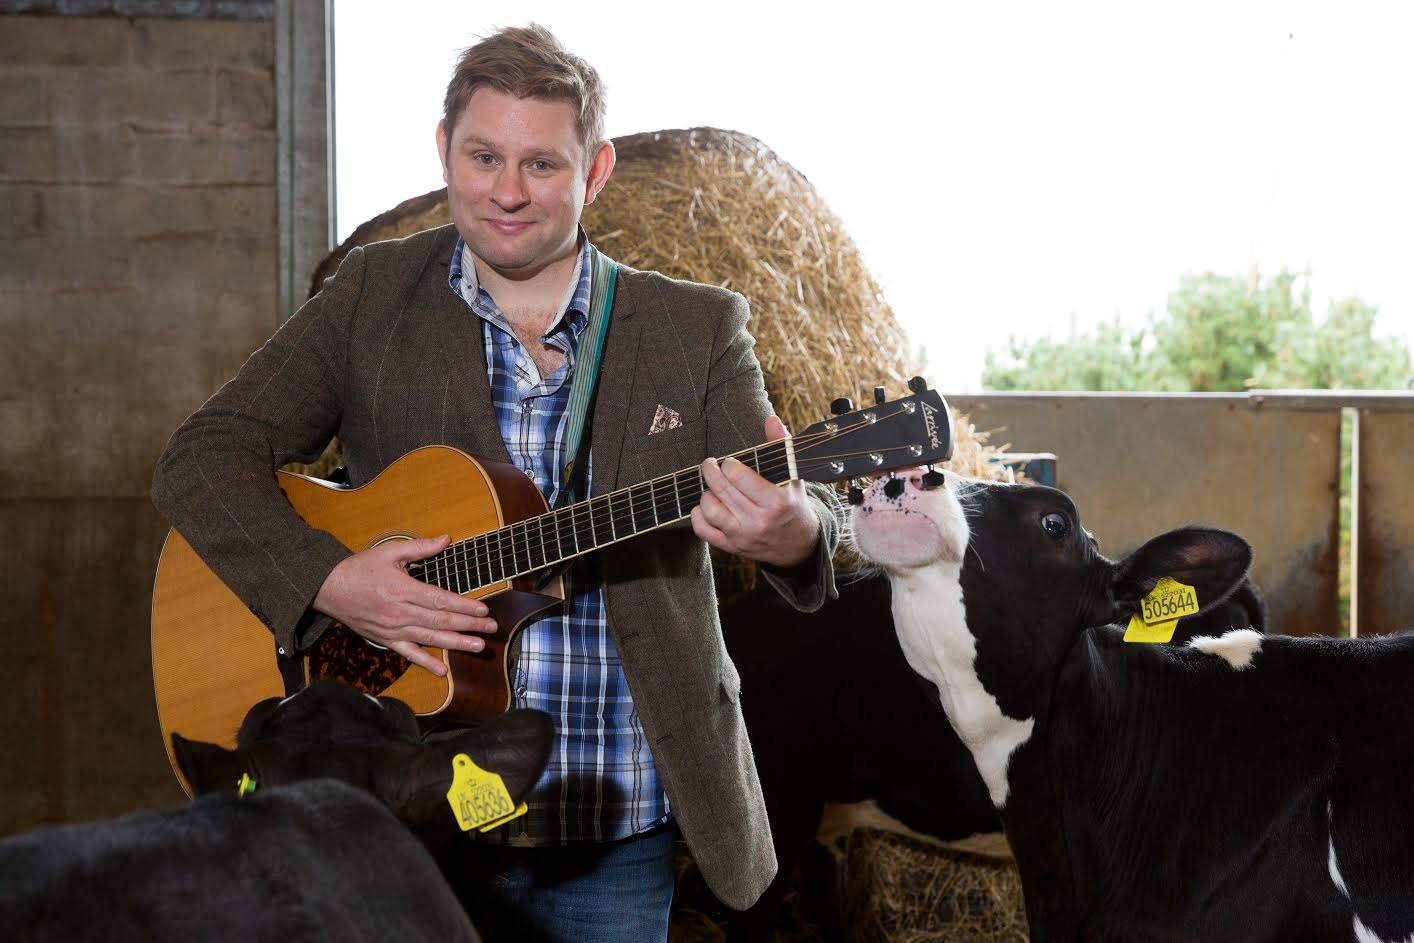 Did the sounds of country music get cows 'moo-ving' along?